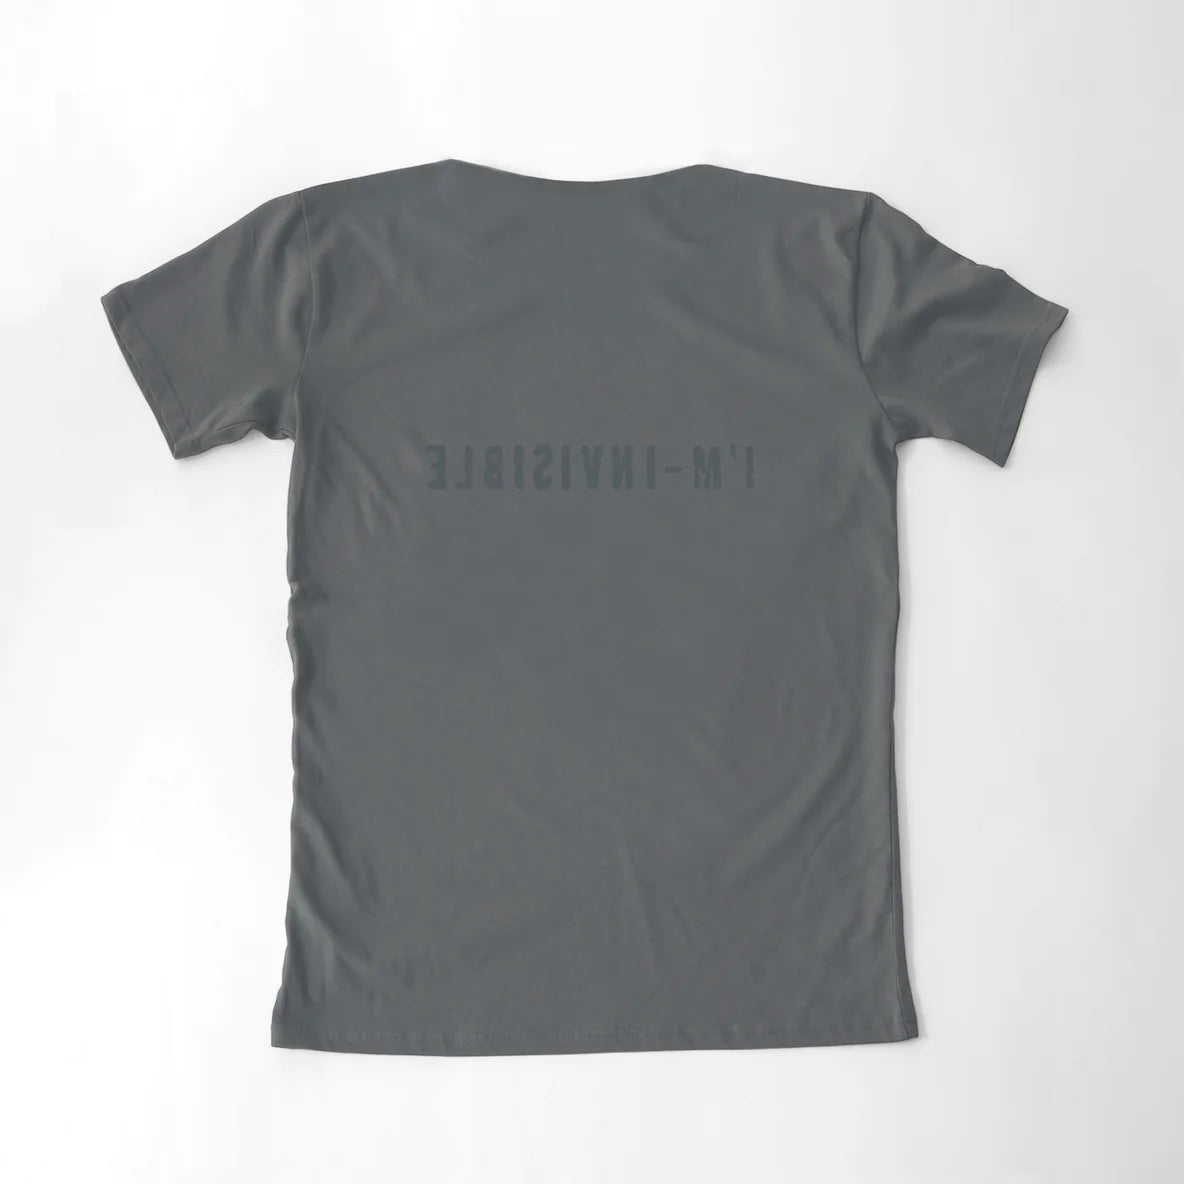 Underworld - *Cowgirl Limited Drop* I'm Invisible Grey Tee Shirt